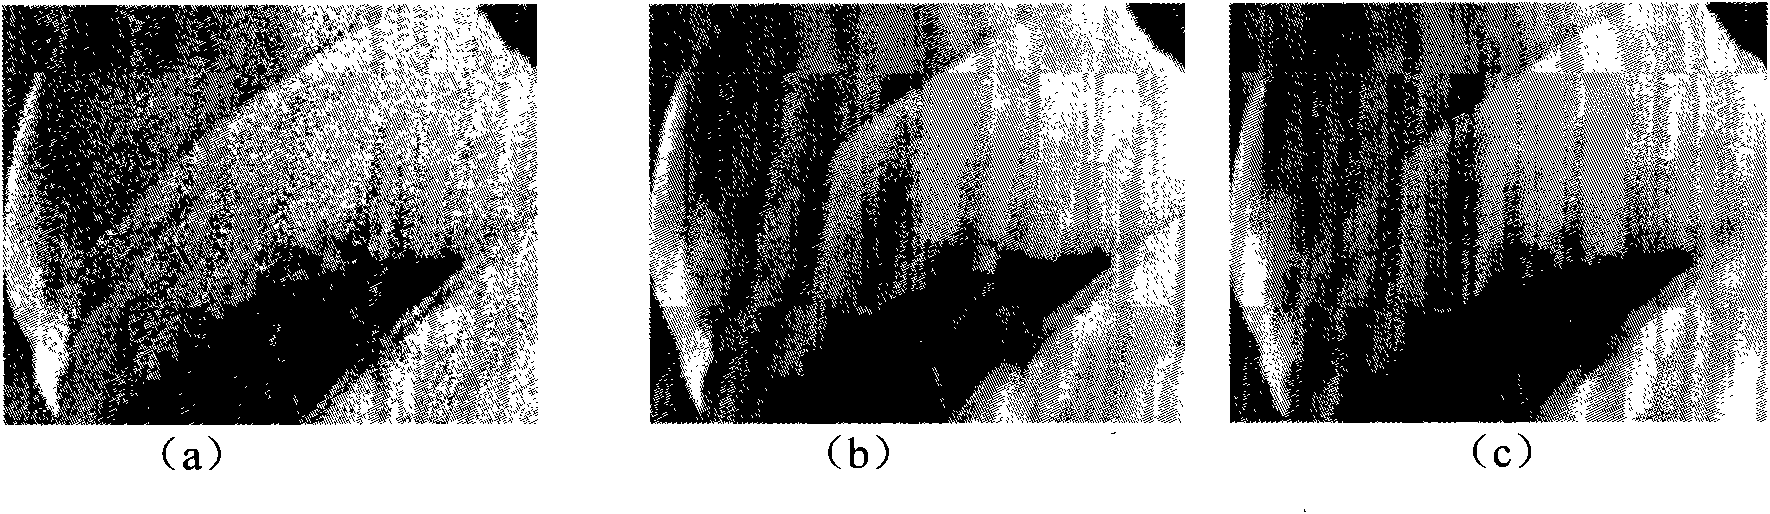 Image denoising method based on non-local means and multi-level directional images